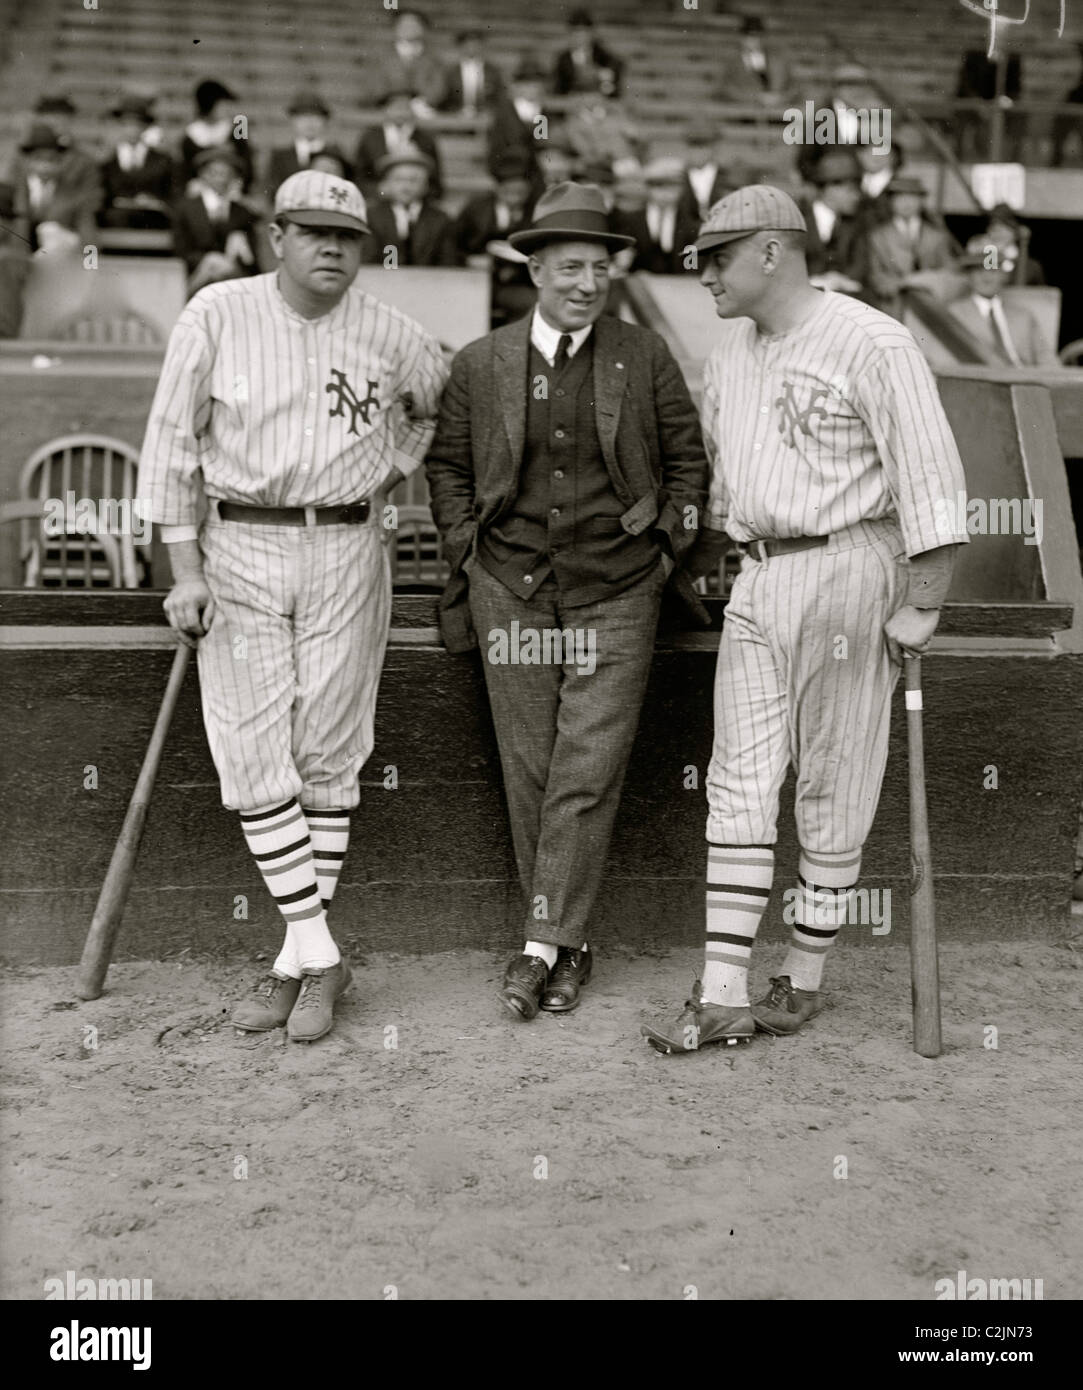 Babe Ruth & Jack Bentley in Giants uniforms for exhibition game; Jack Dunn in middle (baseball)] Stock Photo